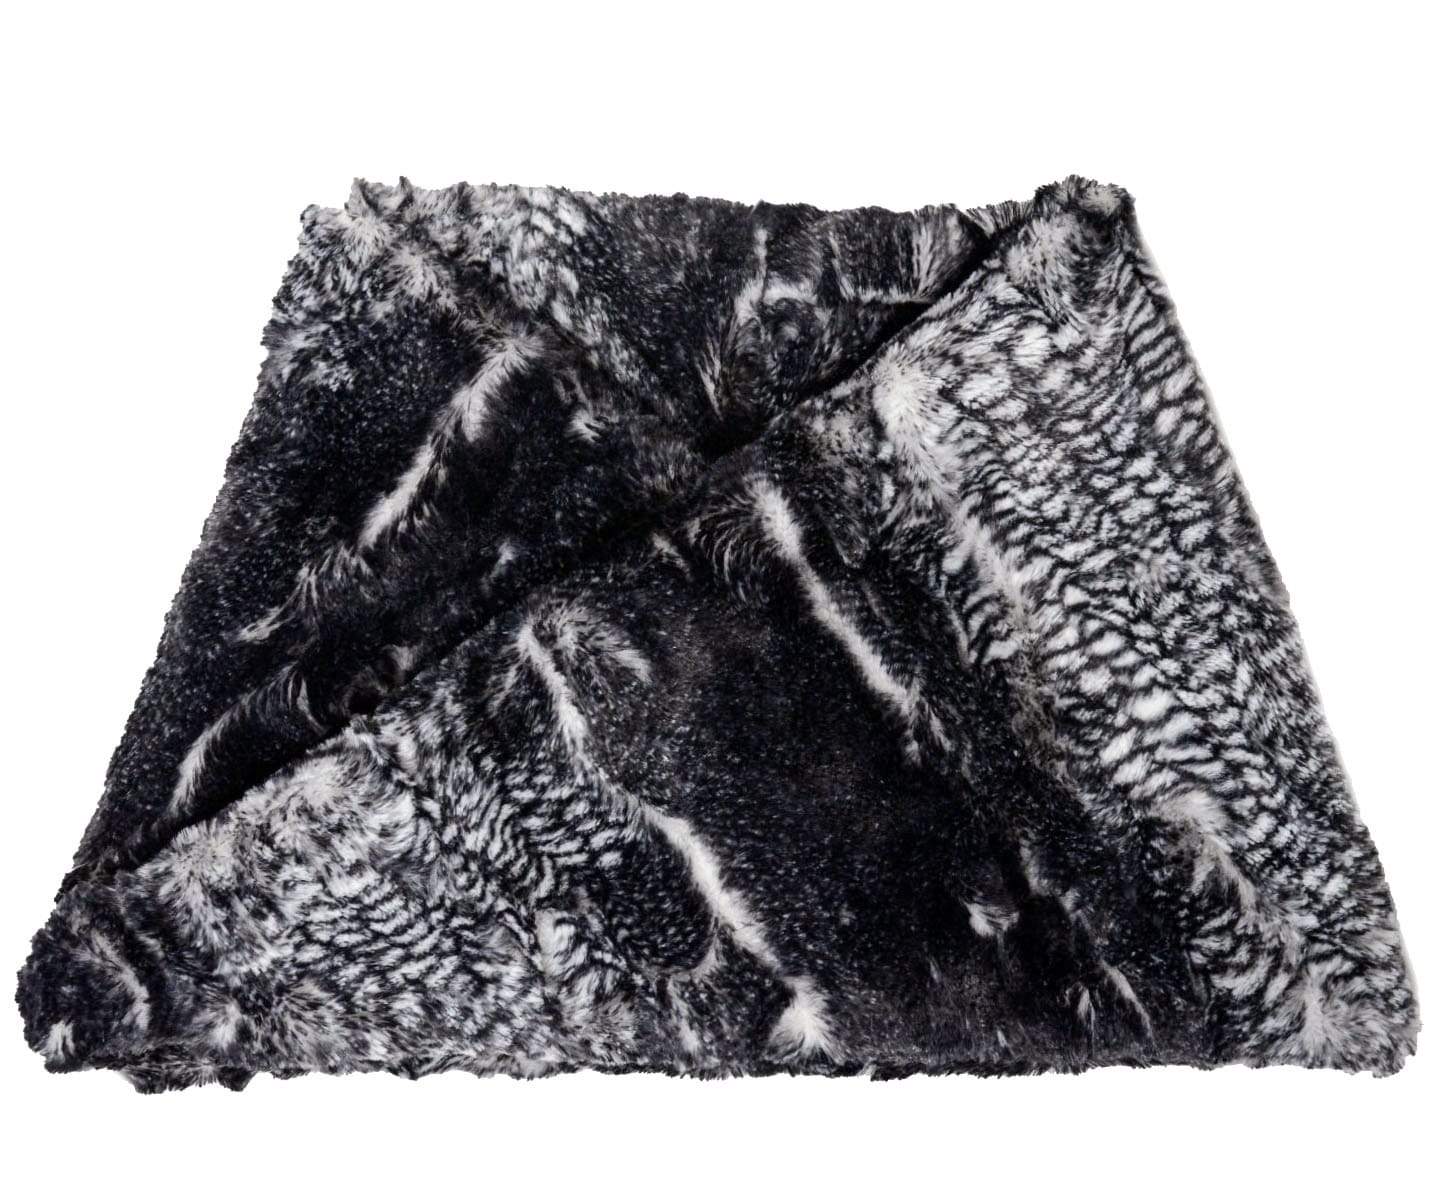 Neck Warmer | Black Mamba Black and White Faux Fur | Handmade in the USA by Pandemonium Seattle